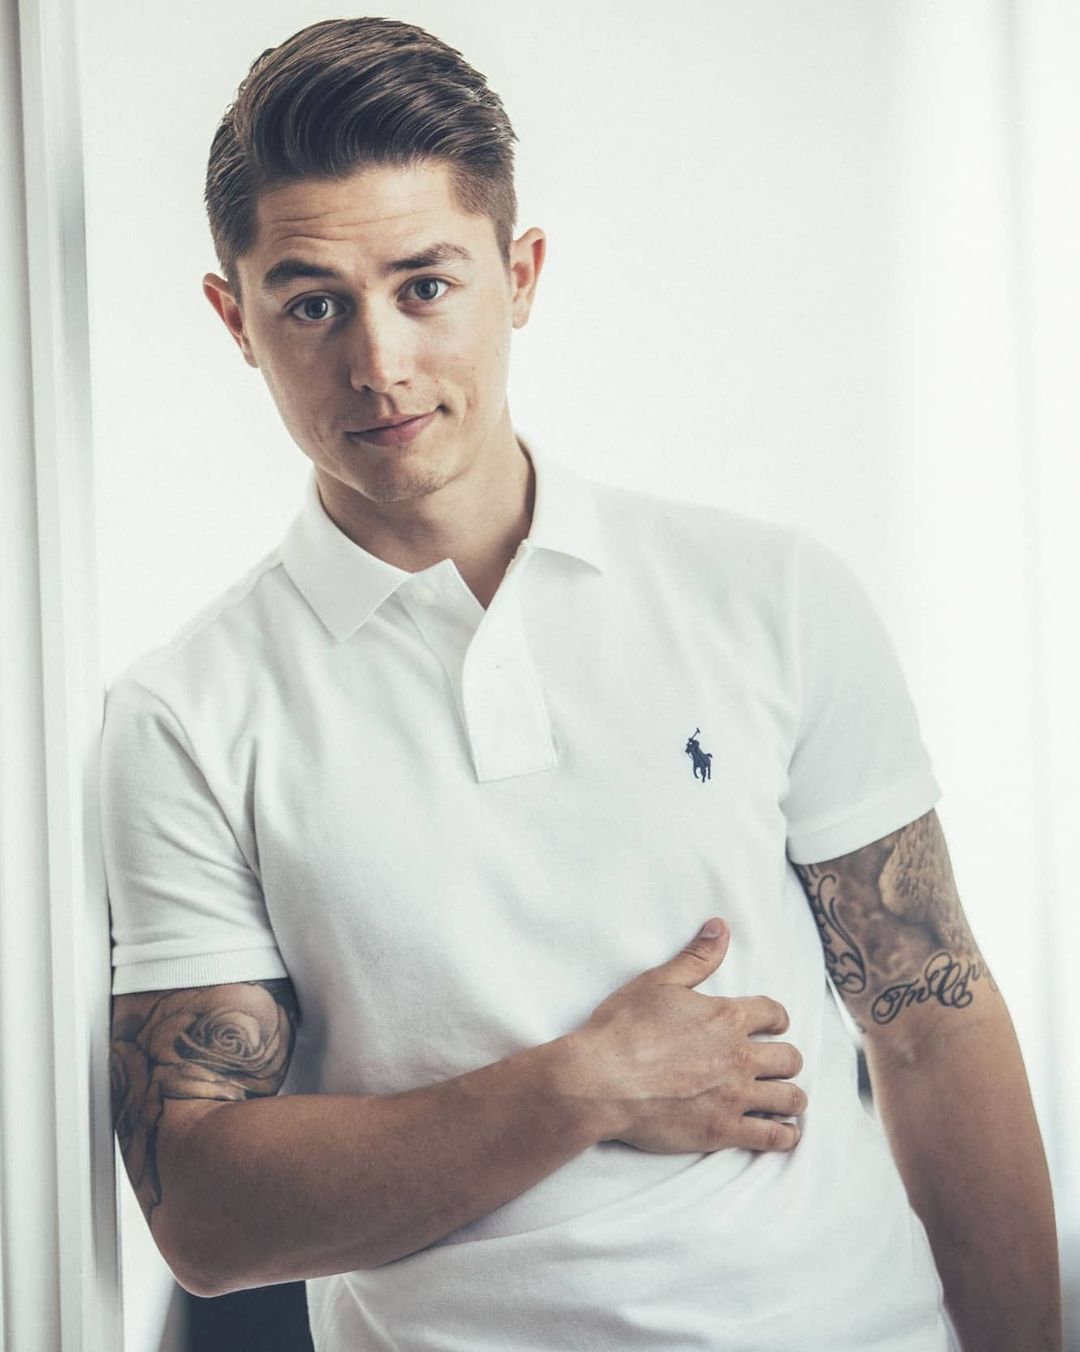  Alexander Hermansson Bio, Wiki, Age, YouTube, Net Worth, and Wife